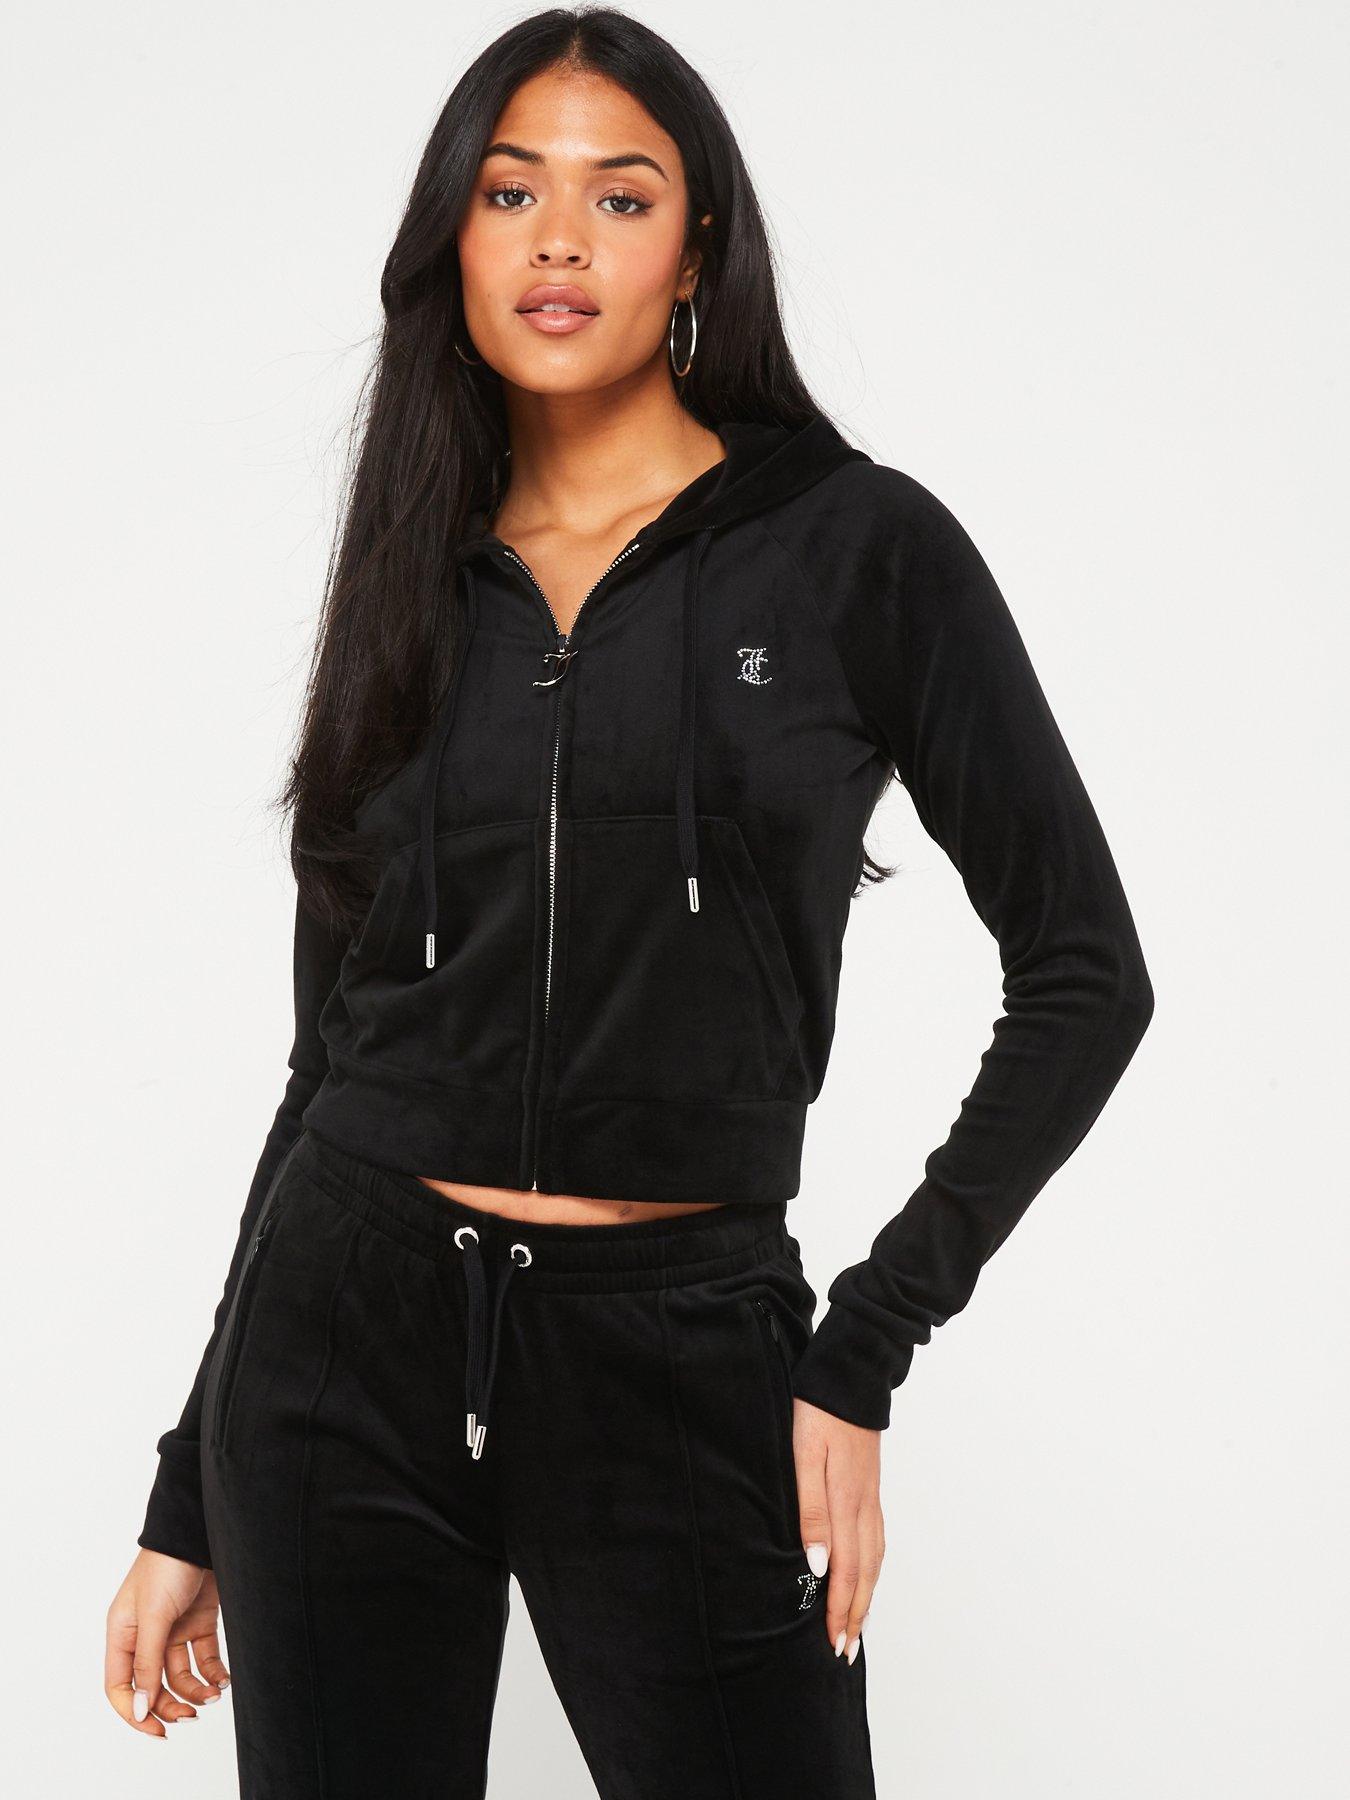 Juicy Couture Sport